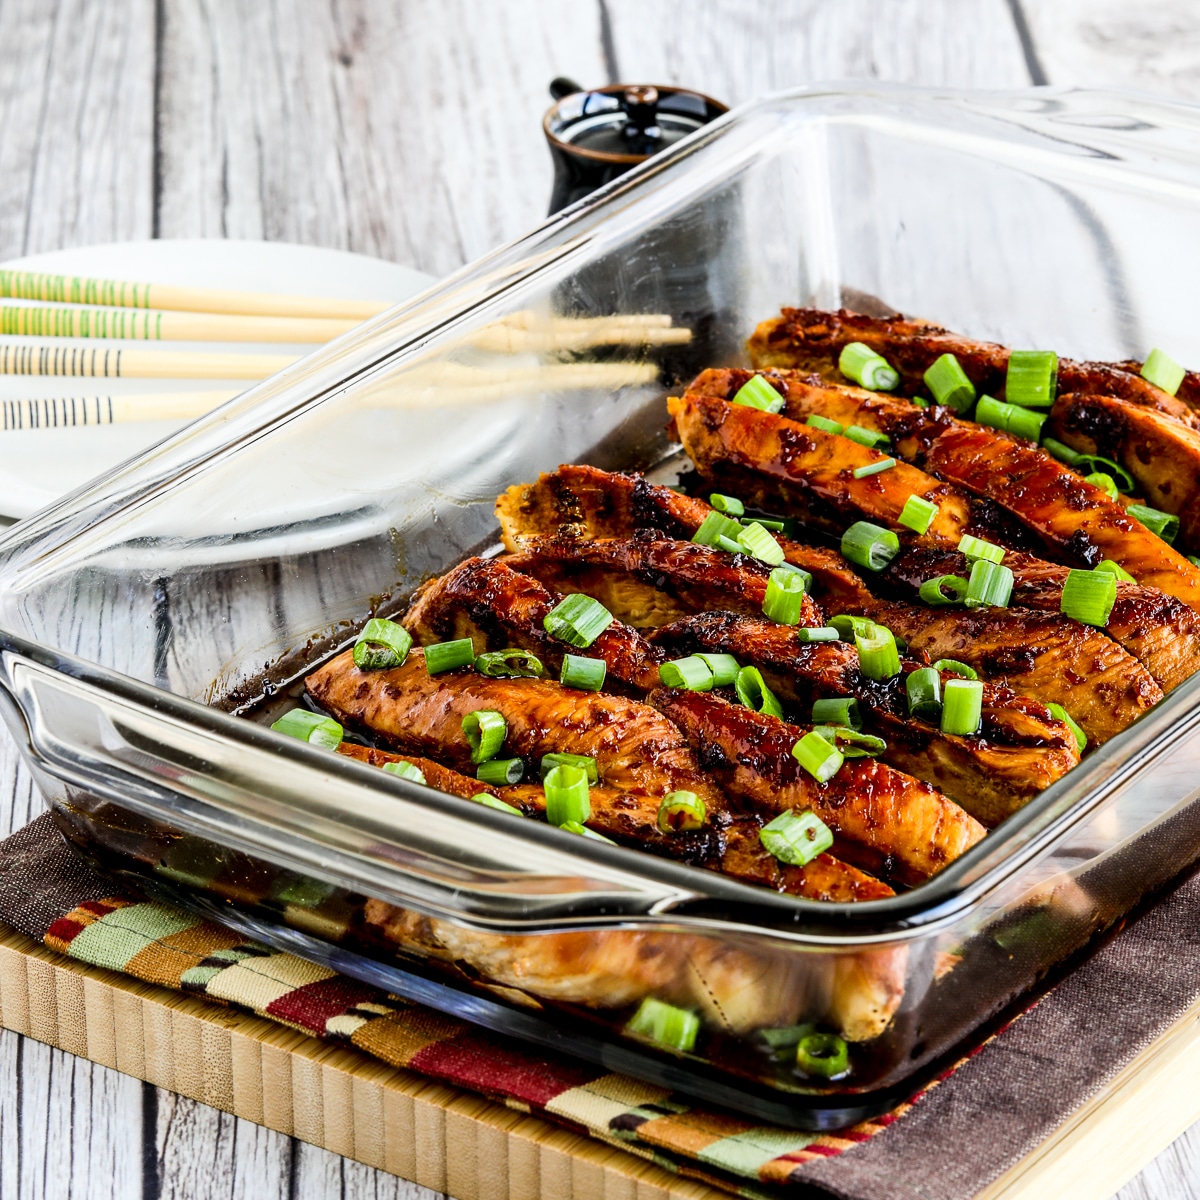 Square image of Baked Teriyaki Chicken shown in baking dish with green onion garnish.